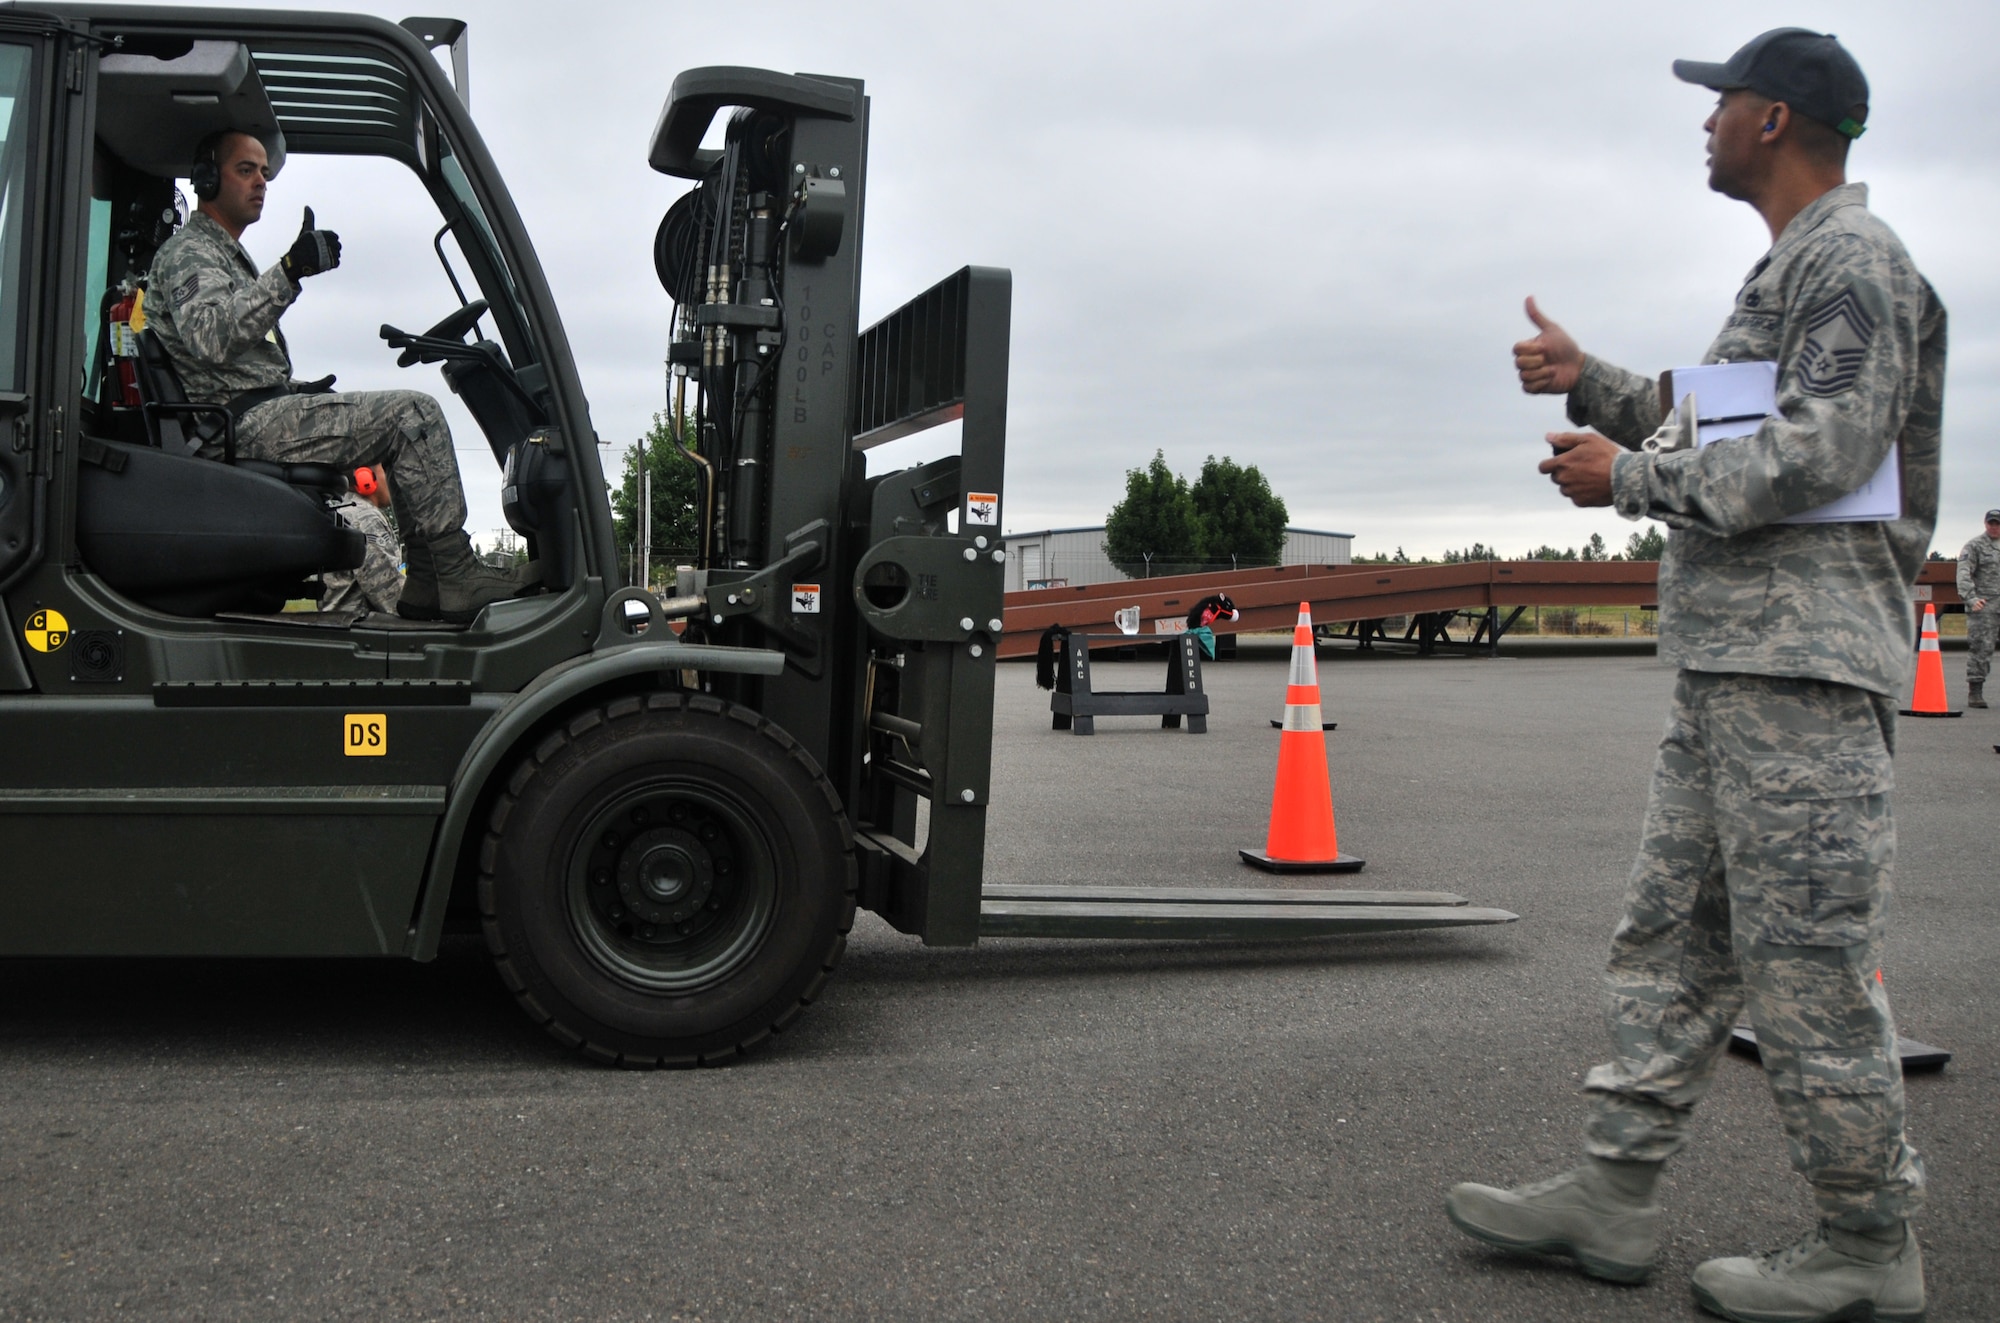 An Airman signals ?all clear? to an umpire during a forklift driving course, July, 25, 2011, at Joint Base Lewis-McChord, Wash. The event was part of Air Mobility Rodeo 2011, a biennial international competition that focuses on mission readiness, featuring airdrops, aerial refueling and other events that showcase the skills of mobility crews from around the world.  (U.S. Air Force photo/ Airman 1st Class Jared Trimarchi) 

